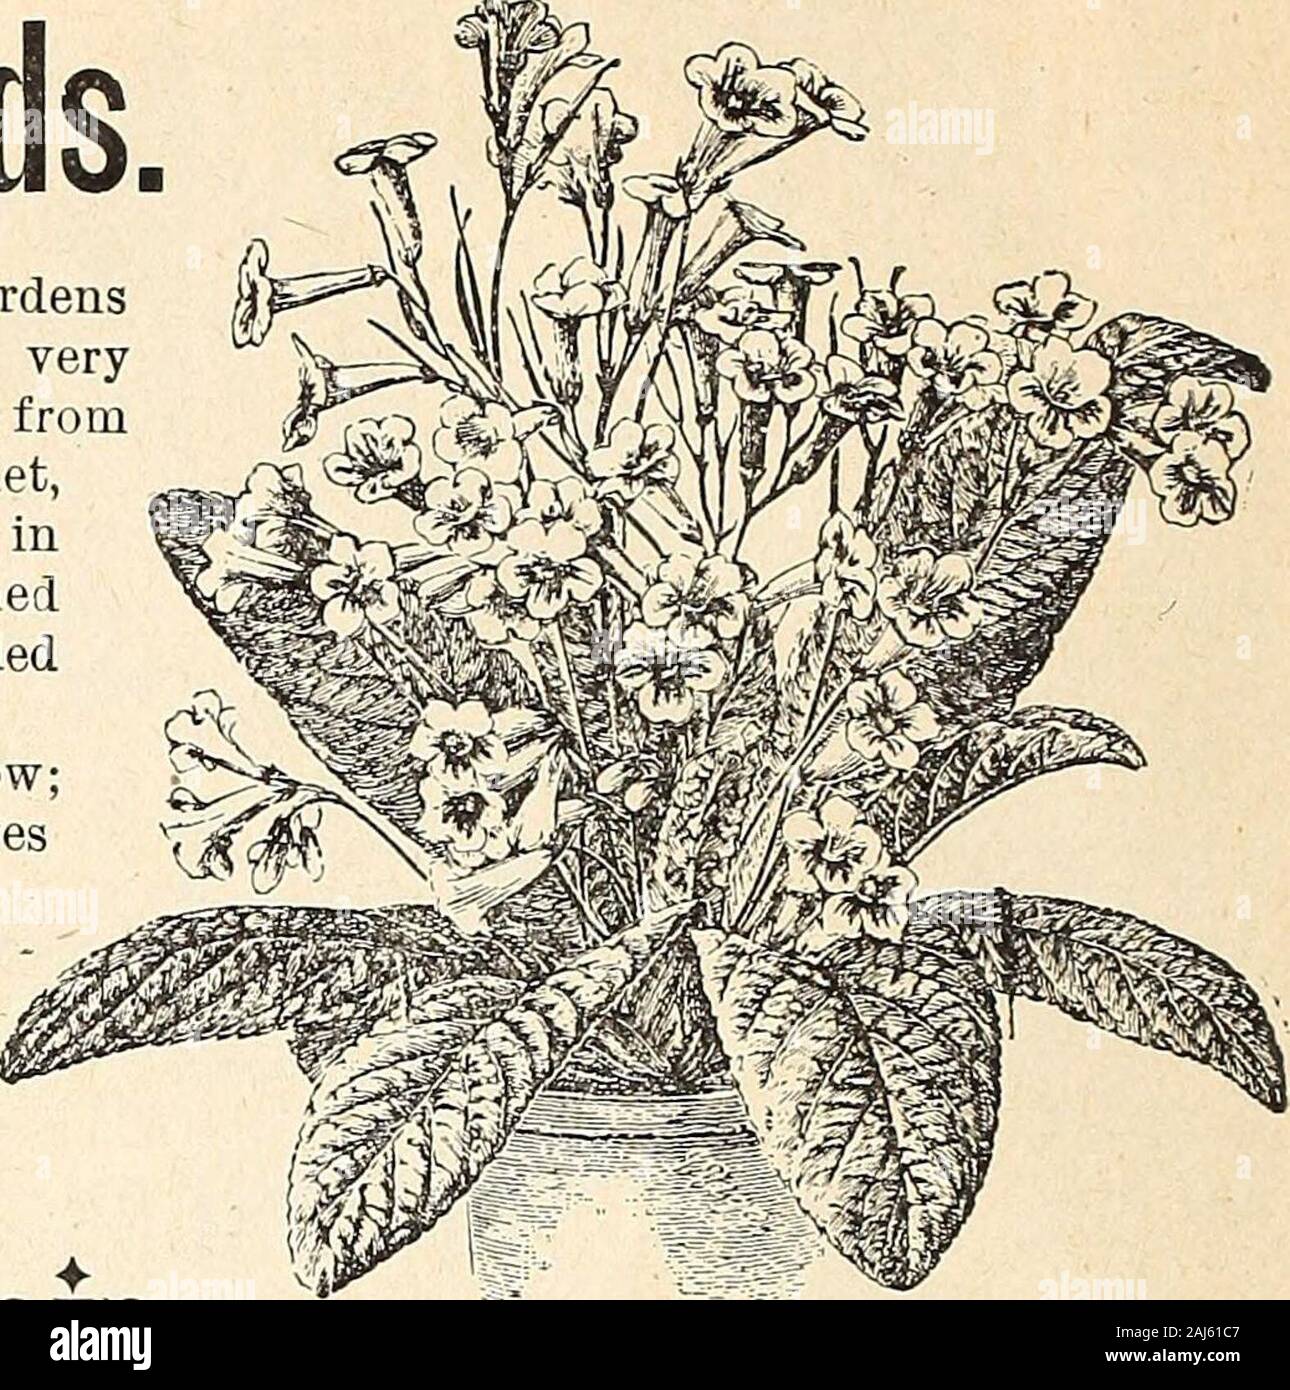 Horitucultural guide : spring 1892 . altural Quide.- Streptocarpus, New Hybrids. THIS beautiful new race of Streptocarpus originated at the Royal GardensKew, London. The variation of colors in these new hybrids is verystriking, scarcely two plants being exactly alike, and the colors range frompure white, pale lavender and all the various shades of blue to deep violet,bright rose and red to rich rosy purple, with all the intermediate tints, and inall the tlowers the throat and three lower segments are marked or splashedwith long blotches or spots of various shades of purple generally shadedwhit Stock Photo